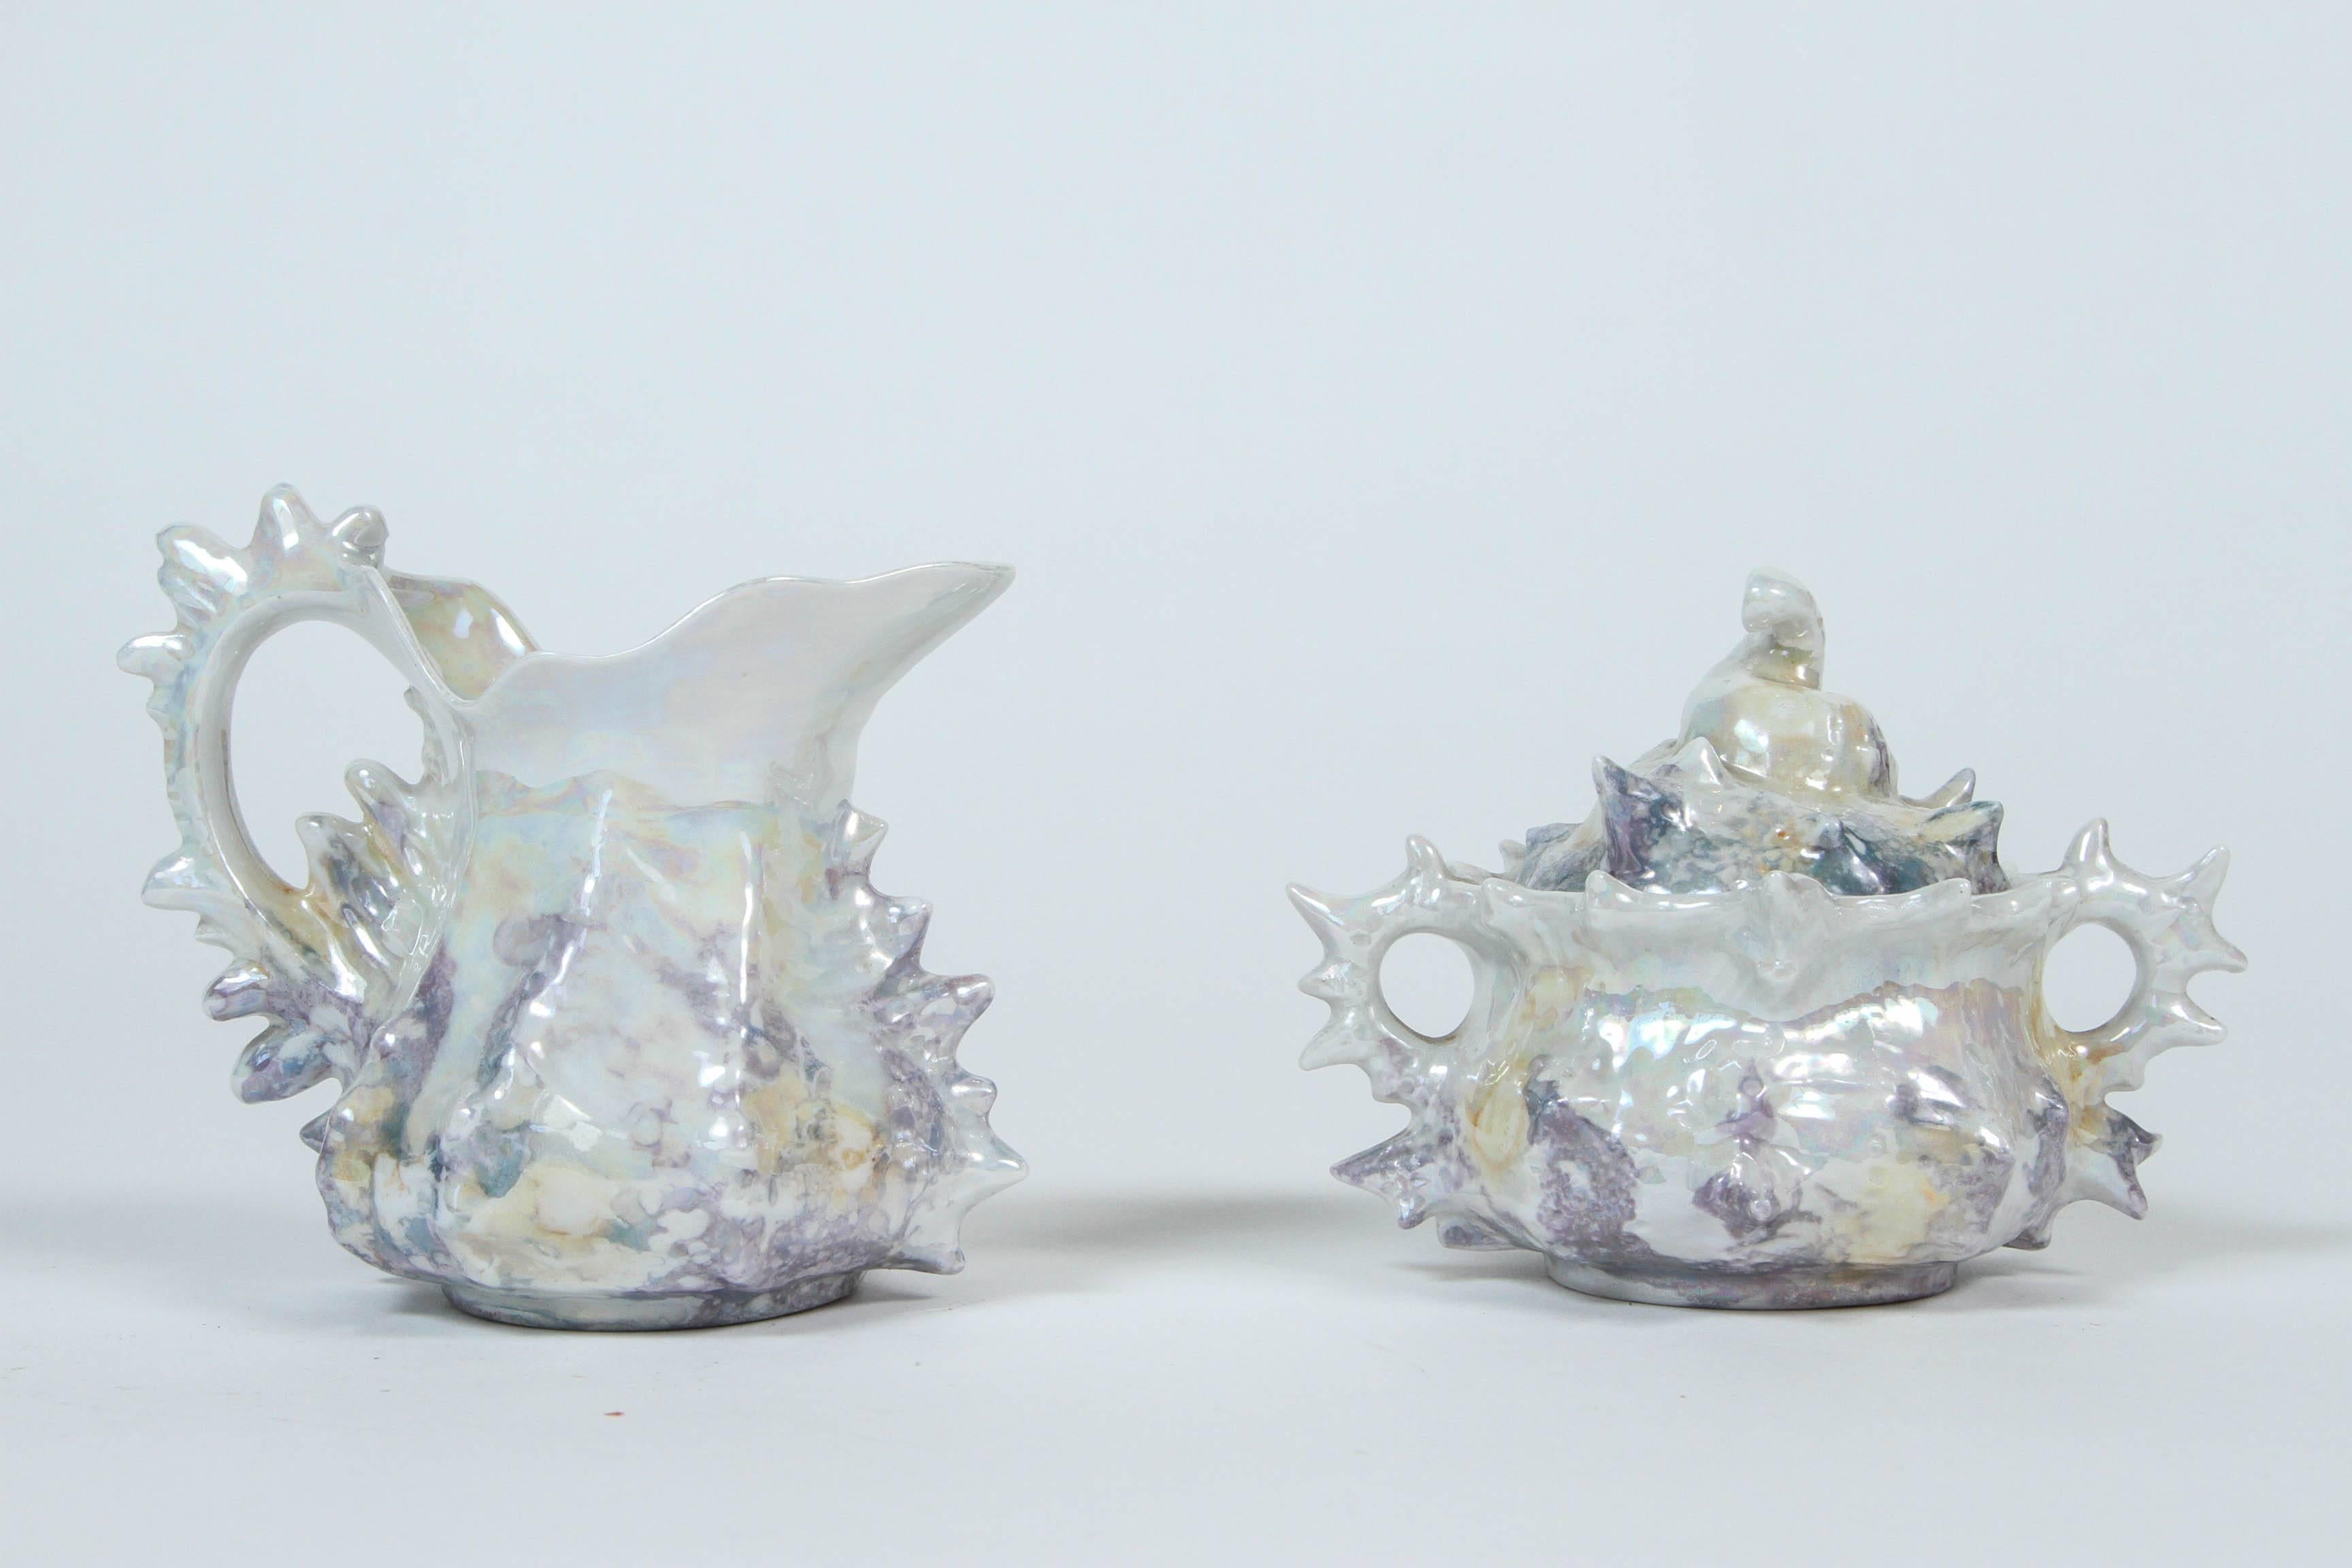 Vintage porcelain lusterware seashell cream and sugar set from Germany.